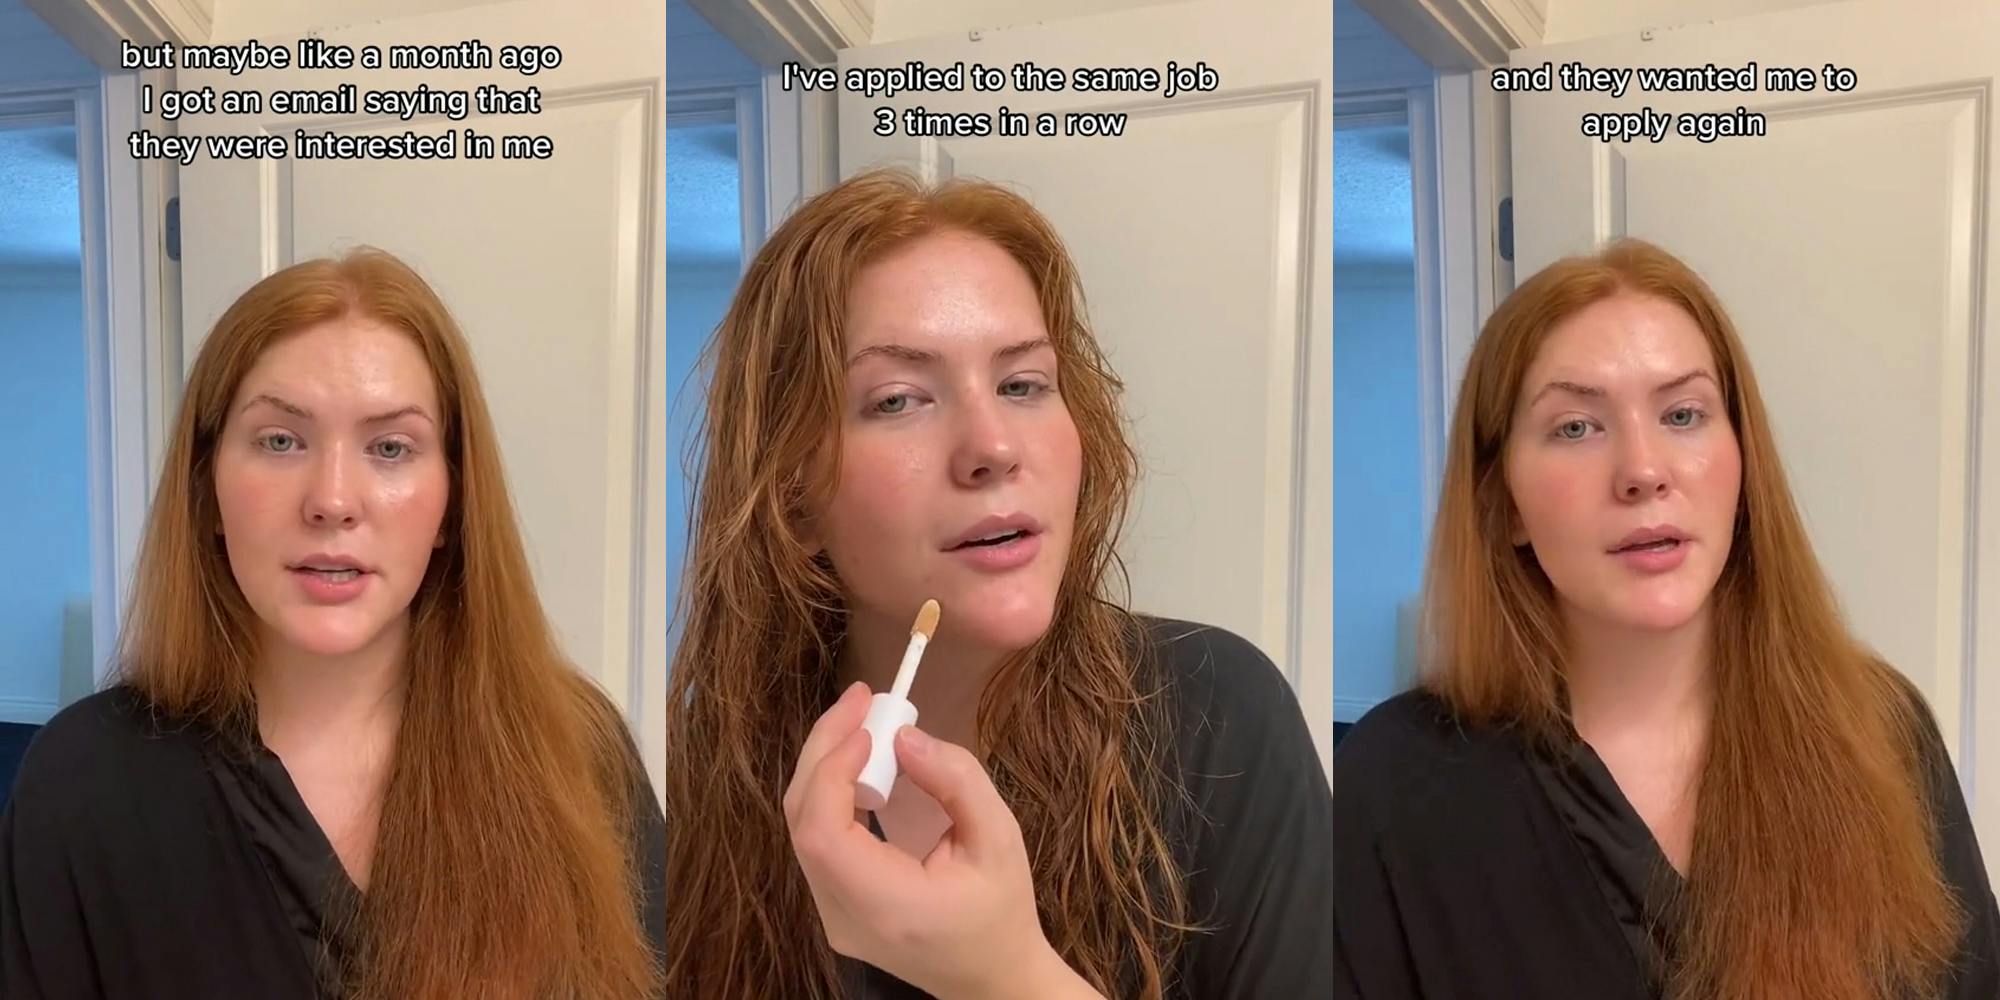 person speaking in front of white door with caption "but maybe like a month ago I got an email saying that they were interested in me" (l) person speaking in front of white door applying concealer with caption "I've applied to the same job 3 times in a row" (c) person speaking in front of white door with caption "and they wanted me to apply again" (r)